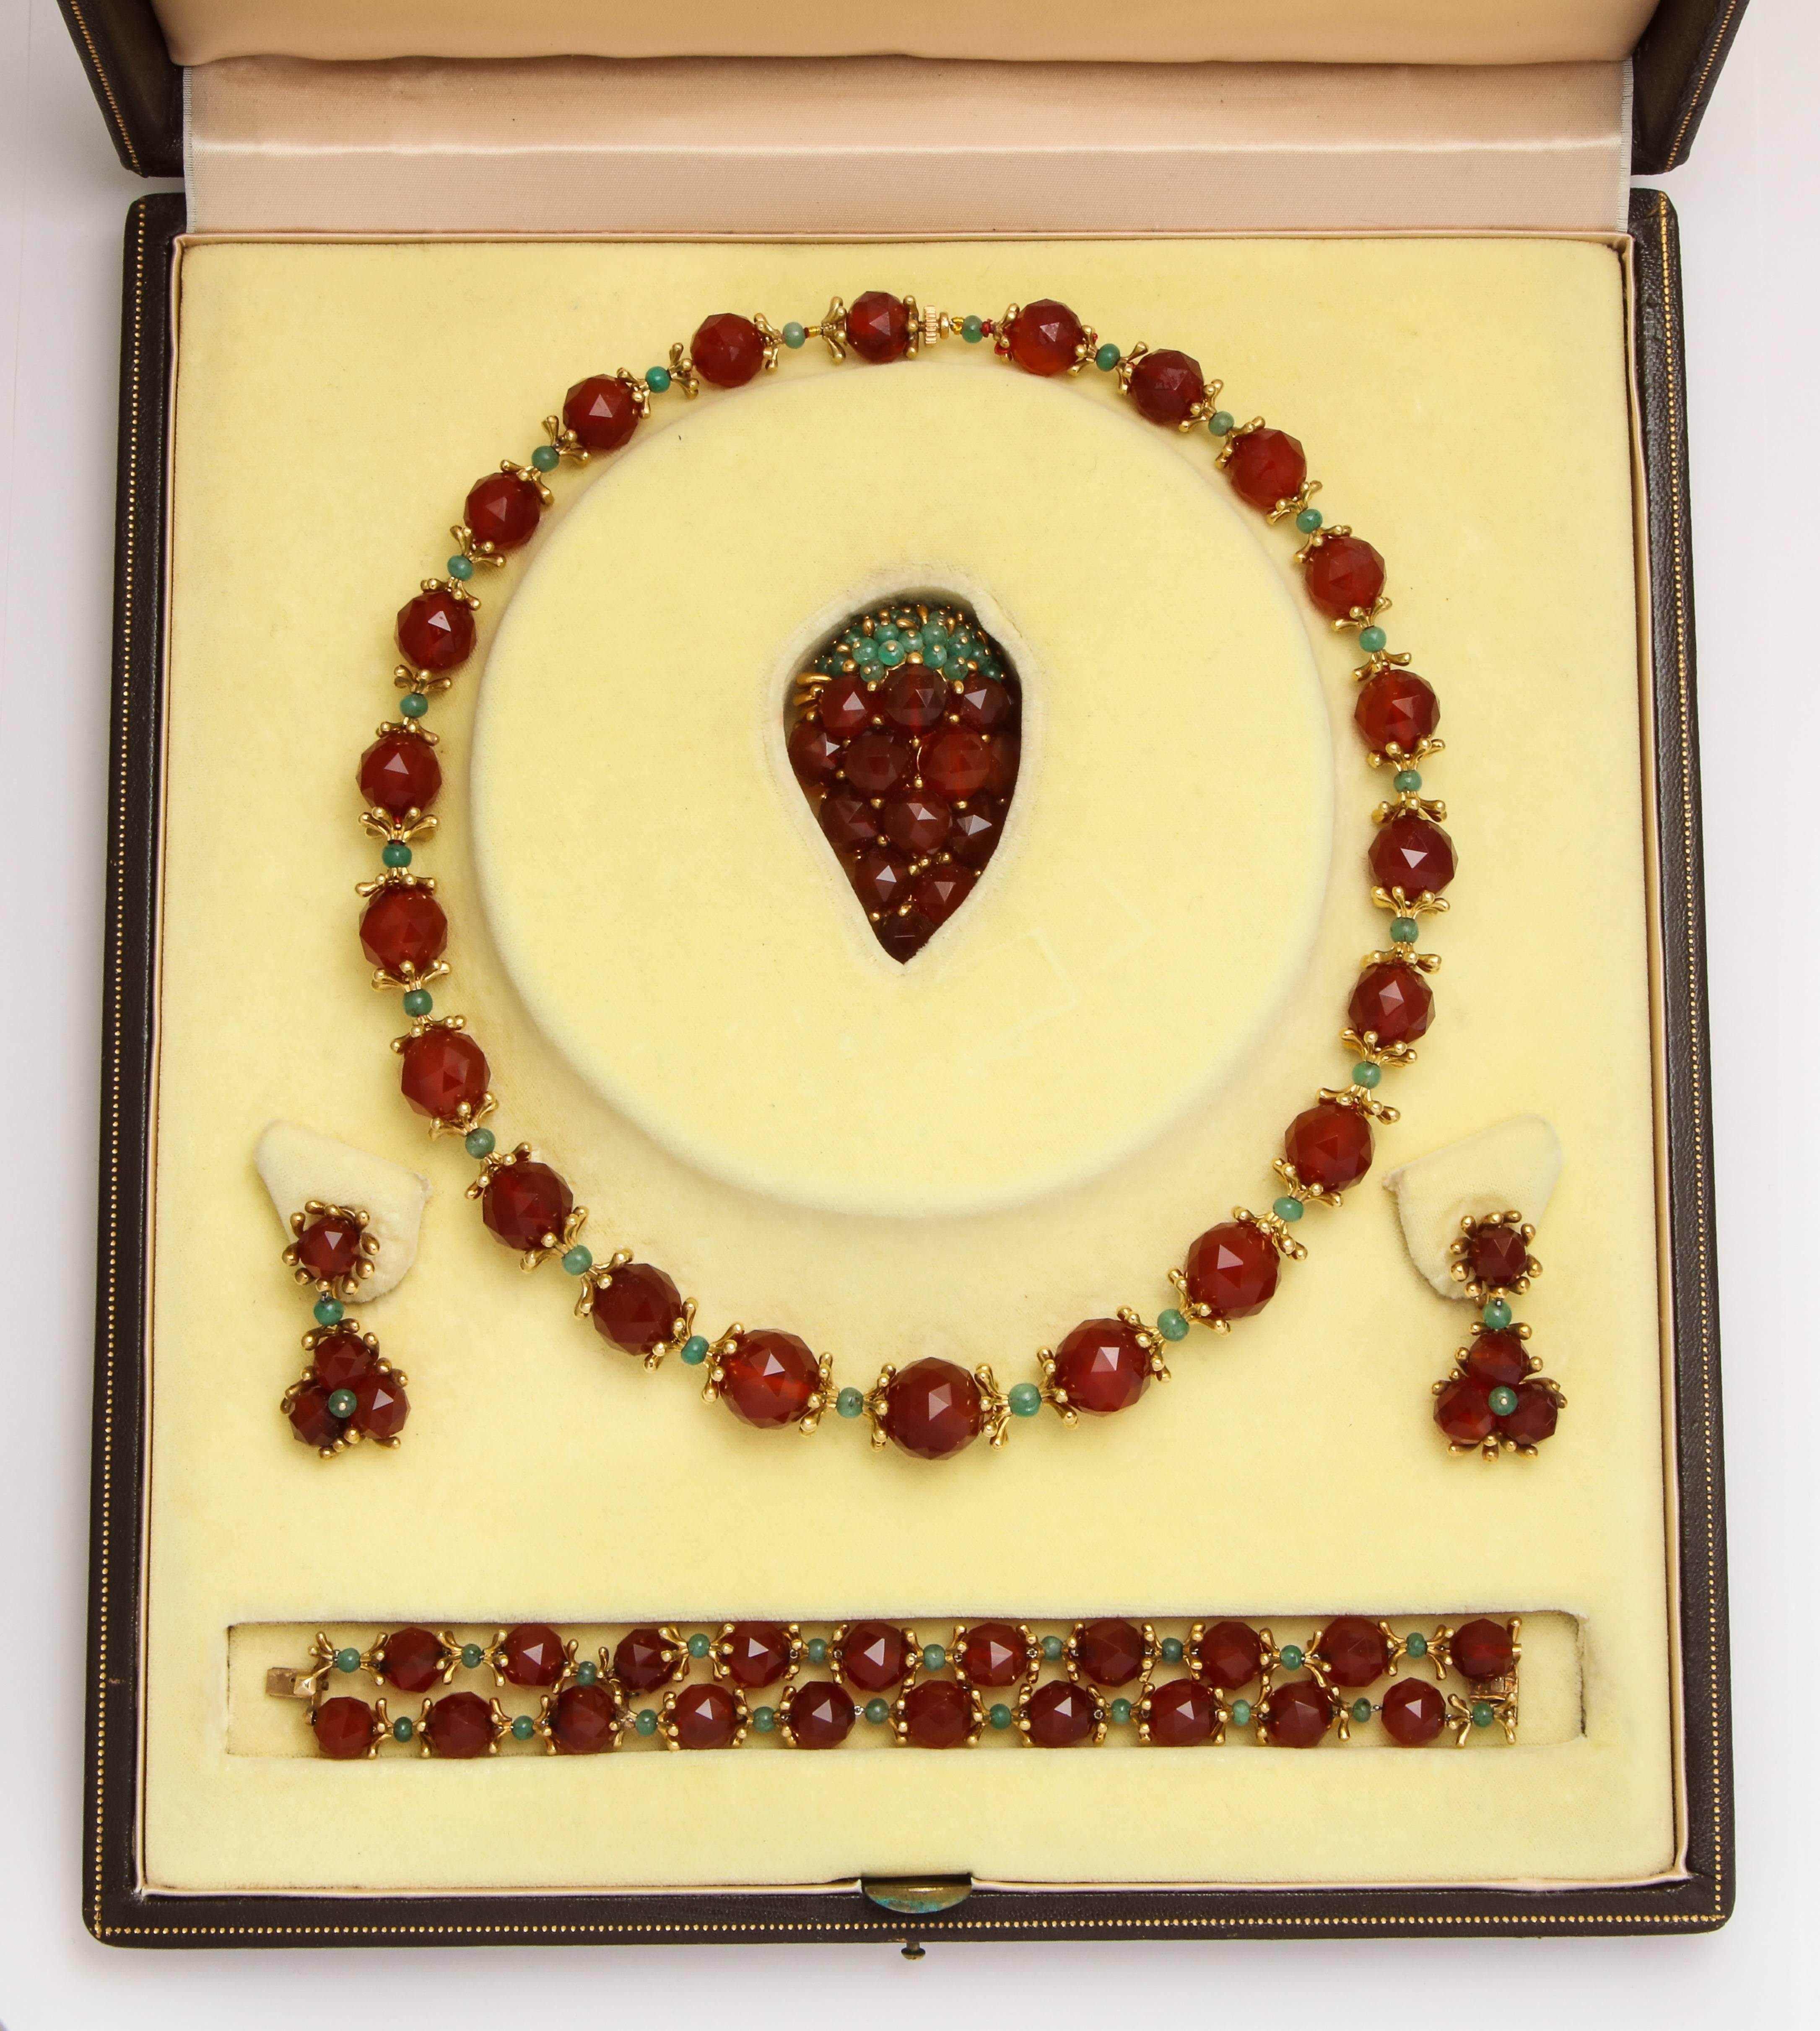 We offer a beautiful one-of-a-kind 1950's jewelry suite by designer Robert Barre using rich amber-colored faceted carnelian beads with 18K gold caps of modern organic form separated by emerald beads comprised of a double strand bracelet, graduated